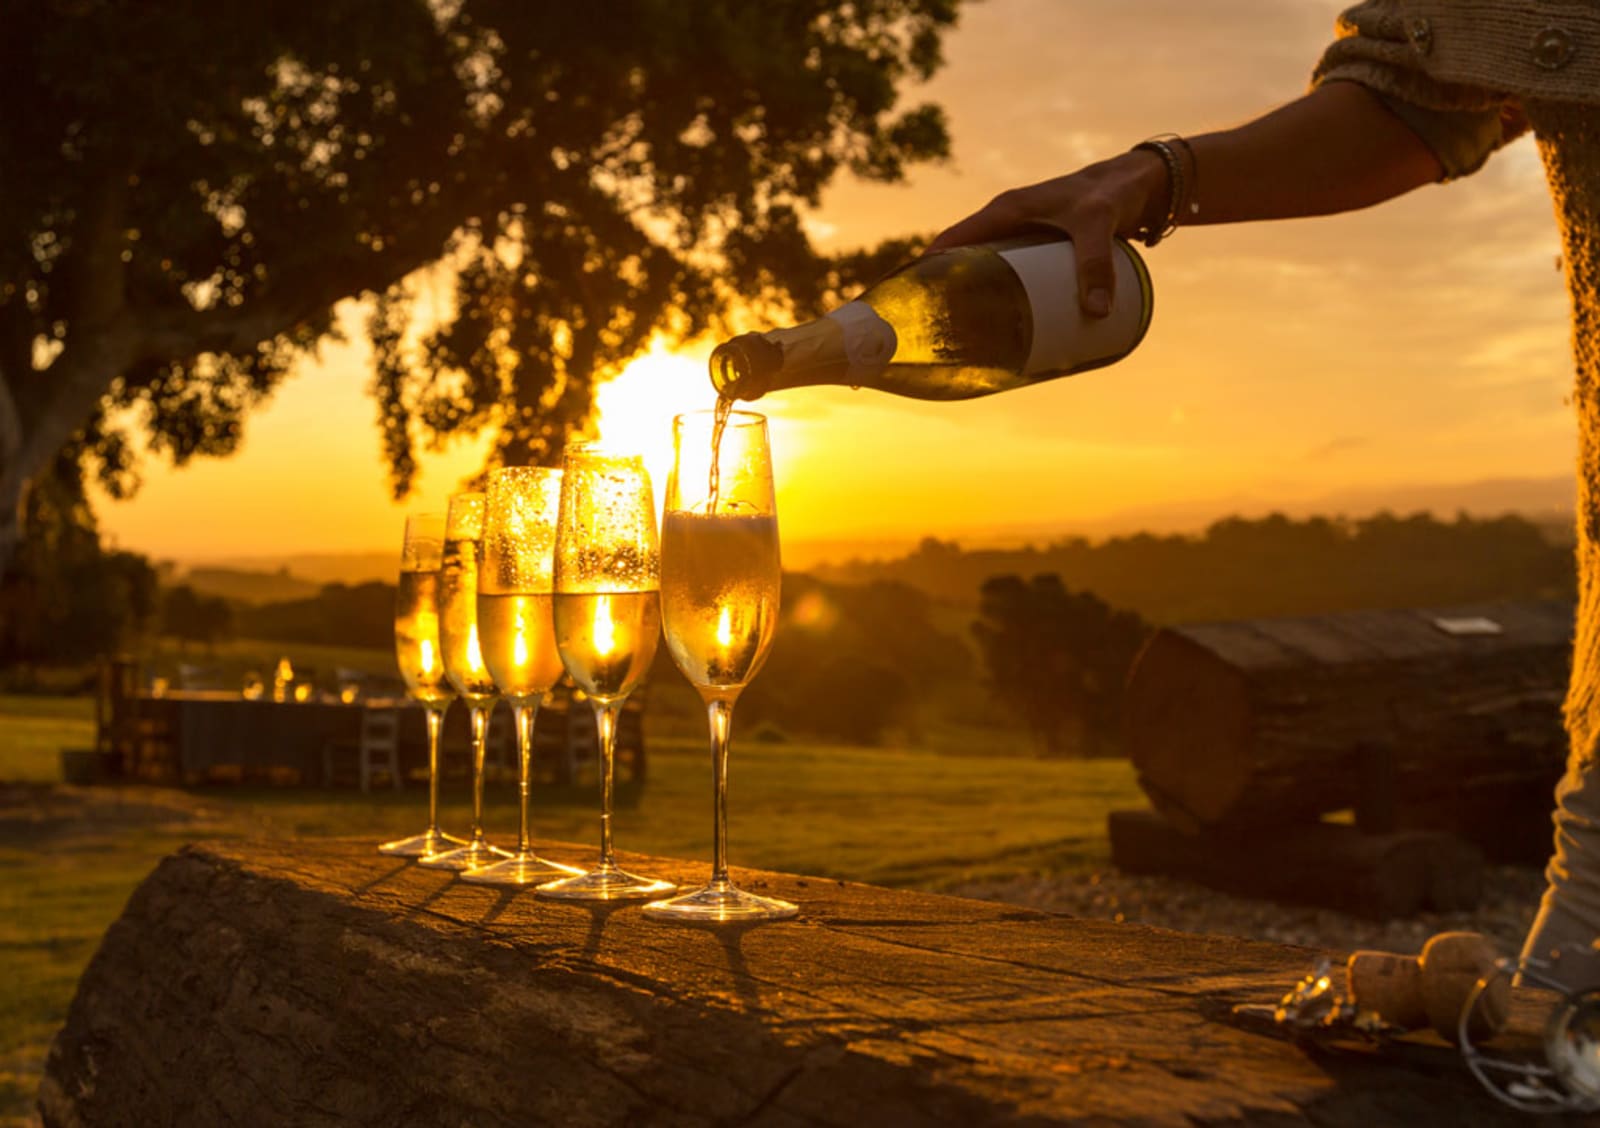 Wine being poured into glasses at sunset